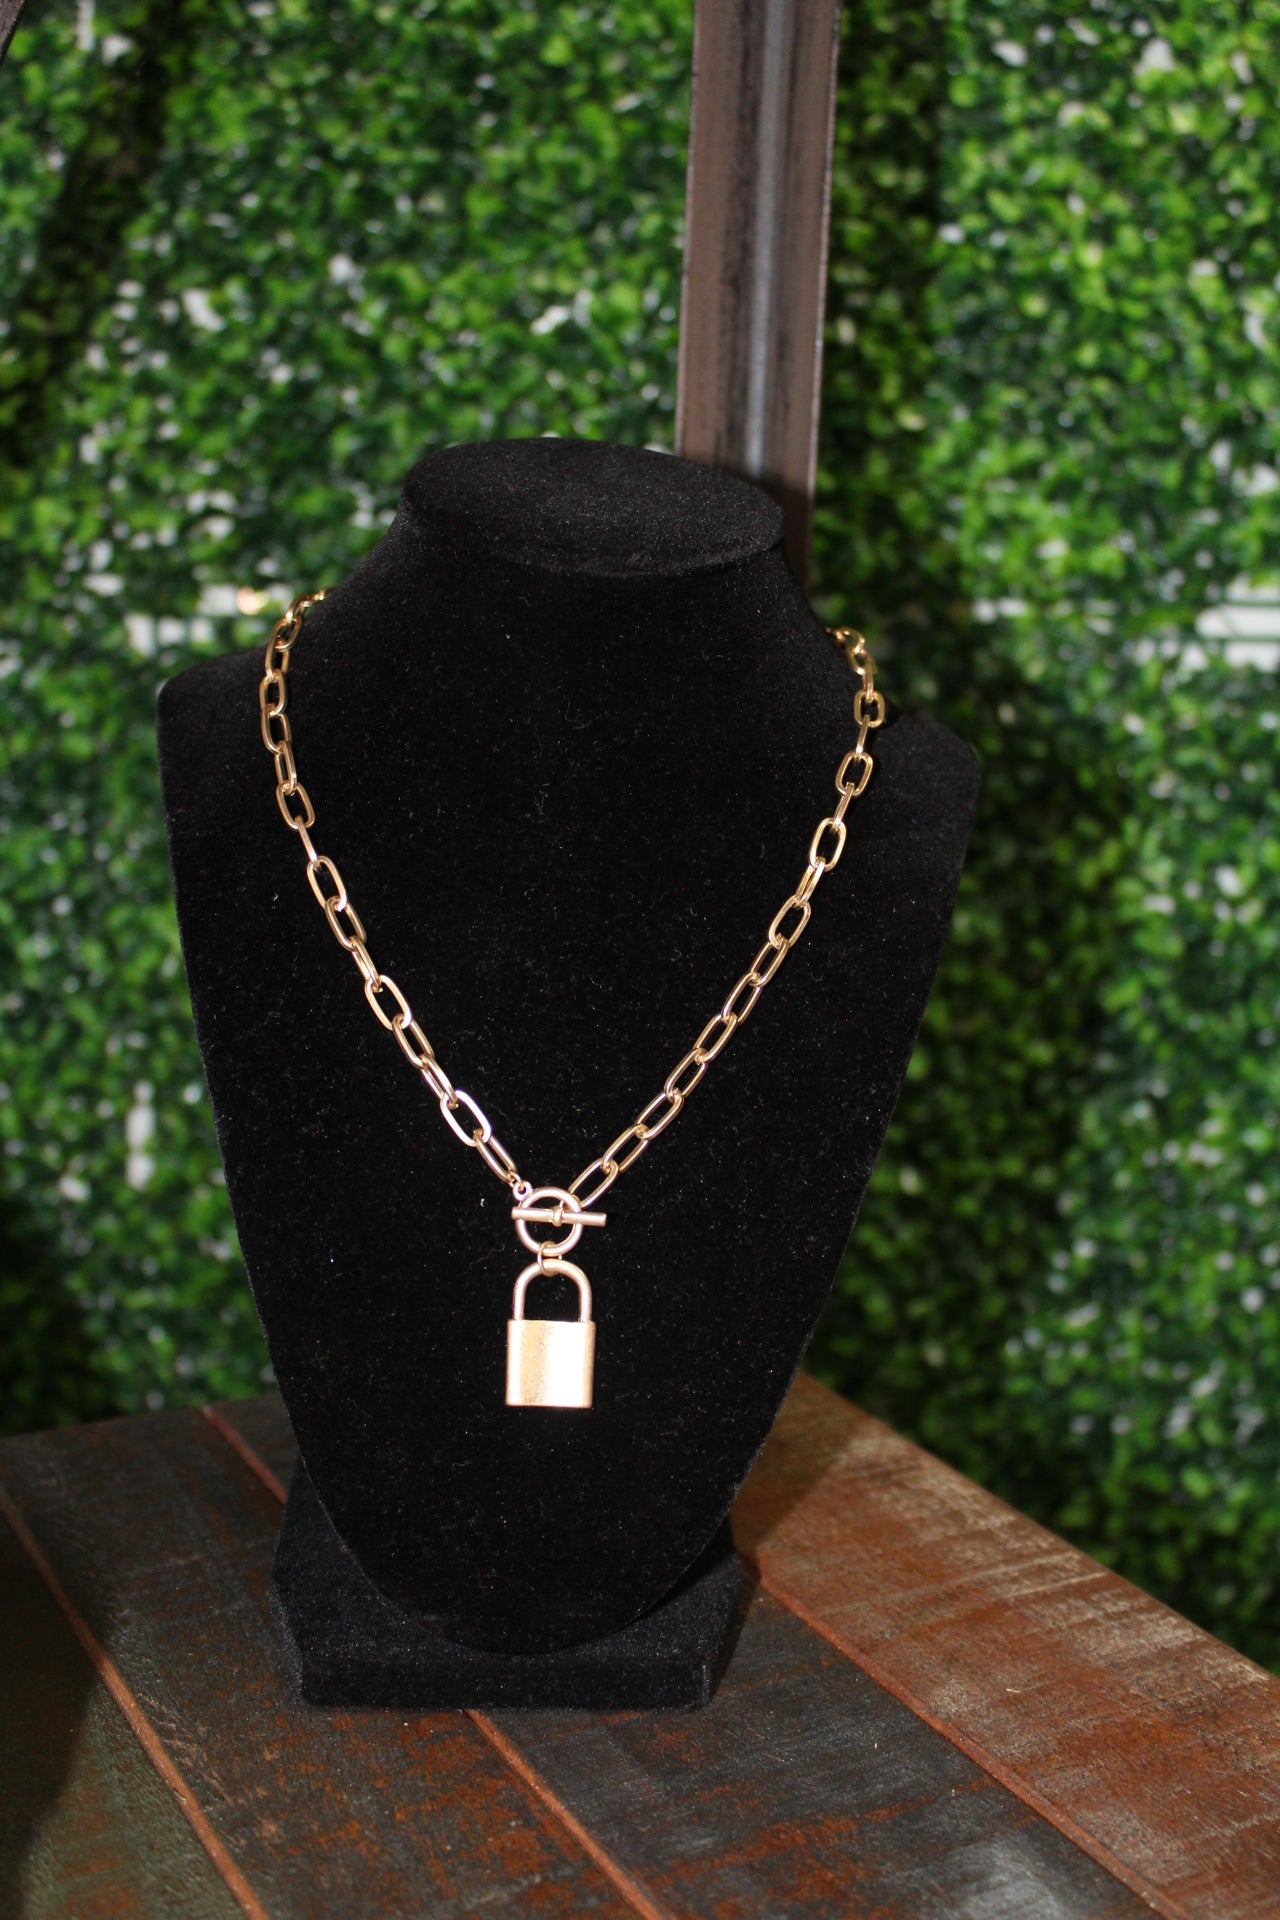 Chain Necklace Padlock Pendant, Chain Link Necklace Lock